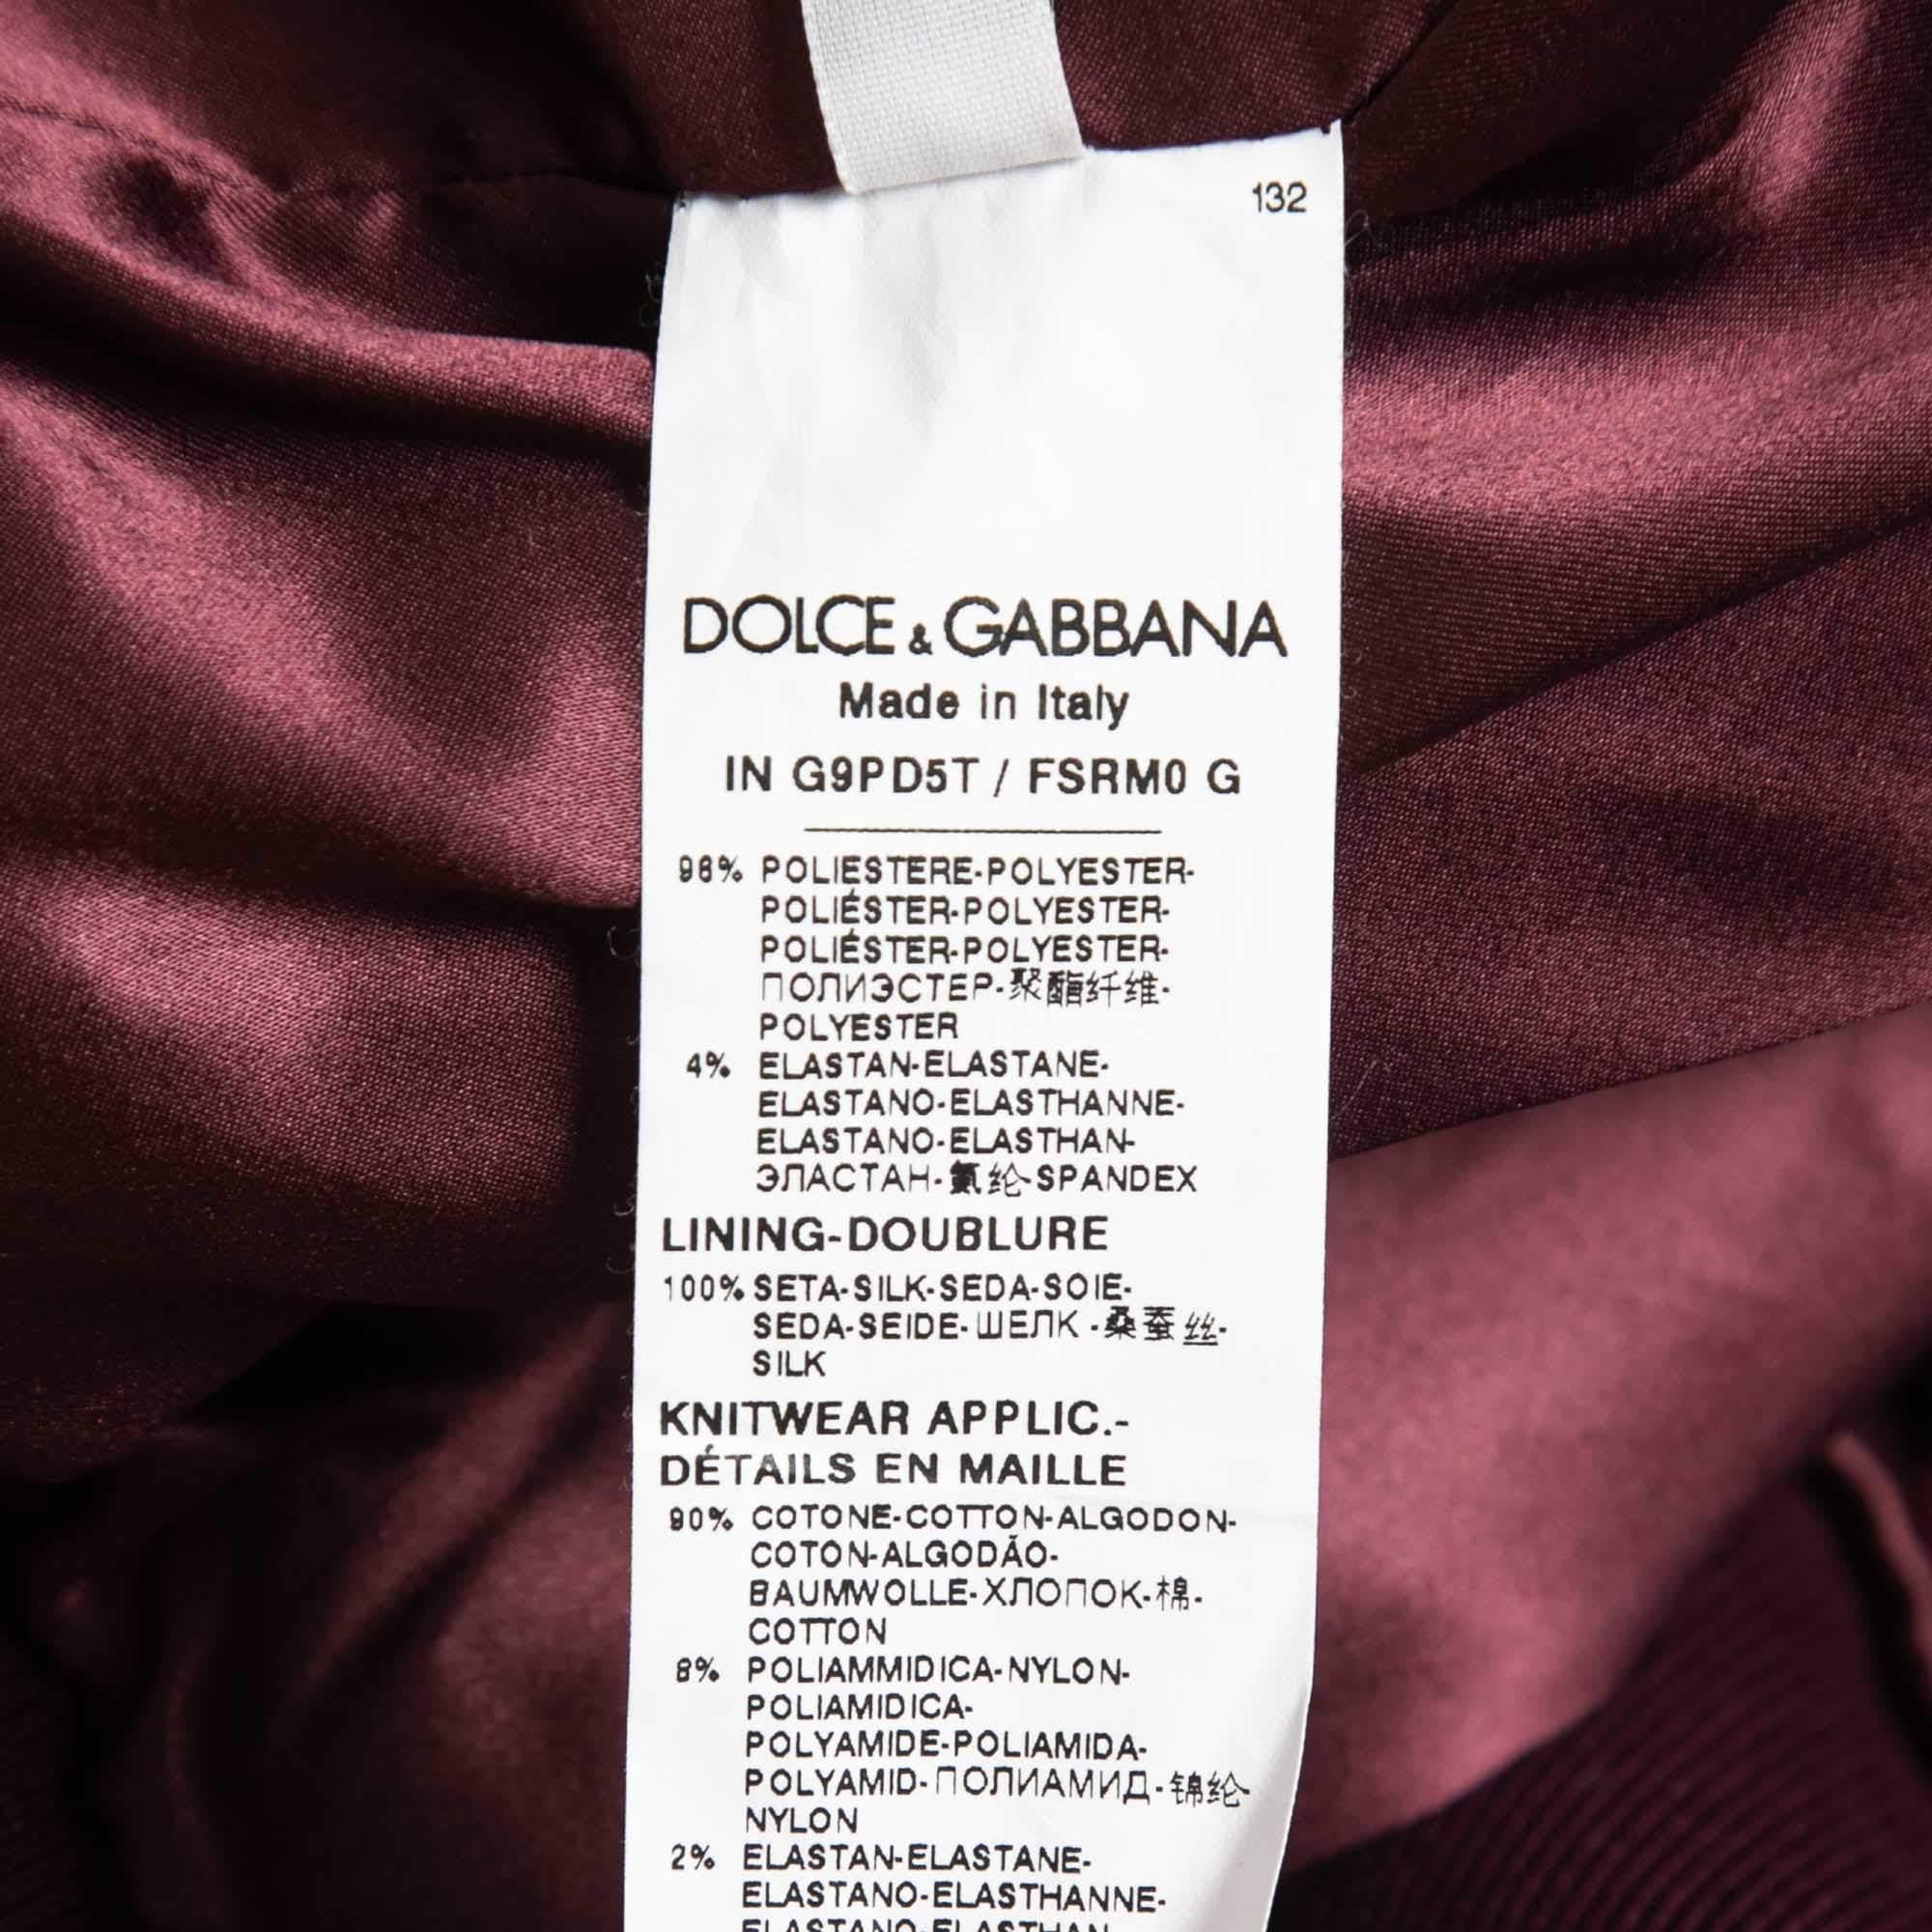 Brown Dolce & Gabbana Burgundy Peacock Feather Print Synthetic Zip Front Bomber Jacket